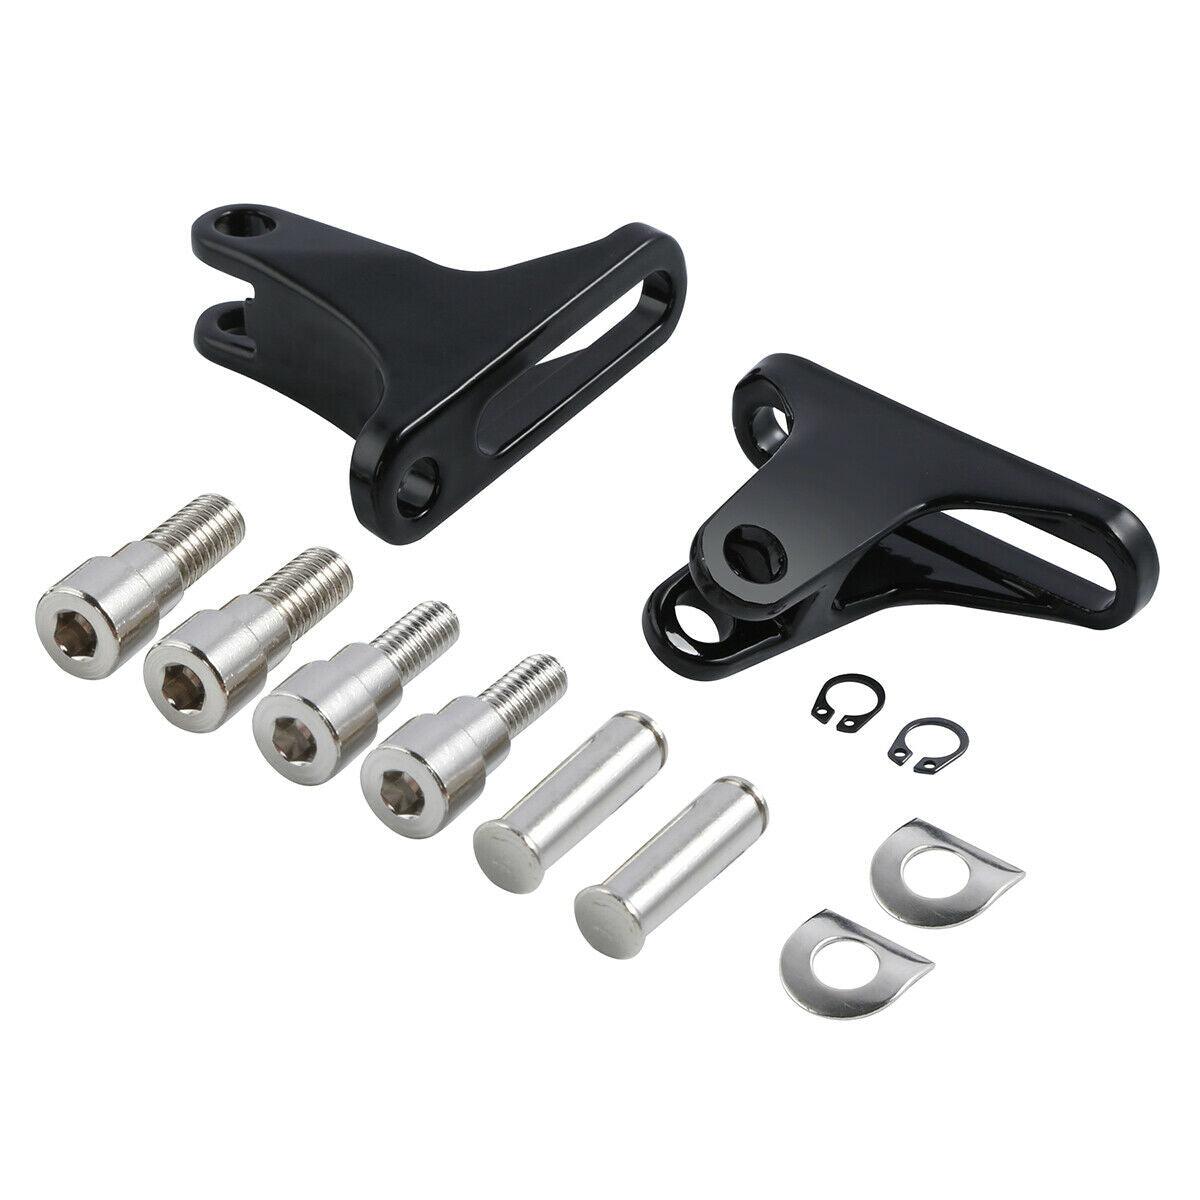 Black Rear Passenger Foot Pegs Fit For Harley Touring Road King Glide 1993-2021 - Moto Life Products